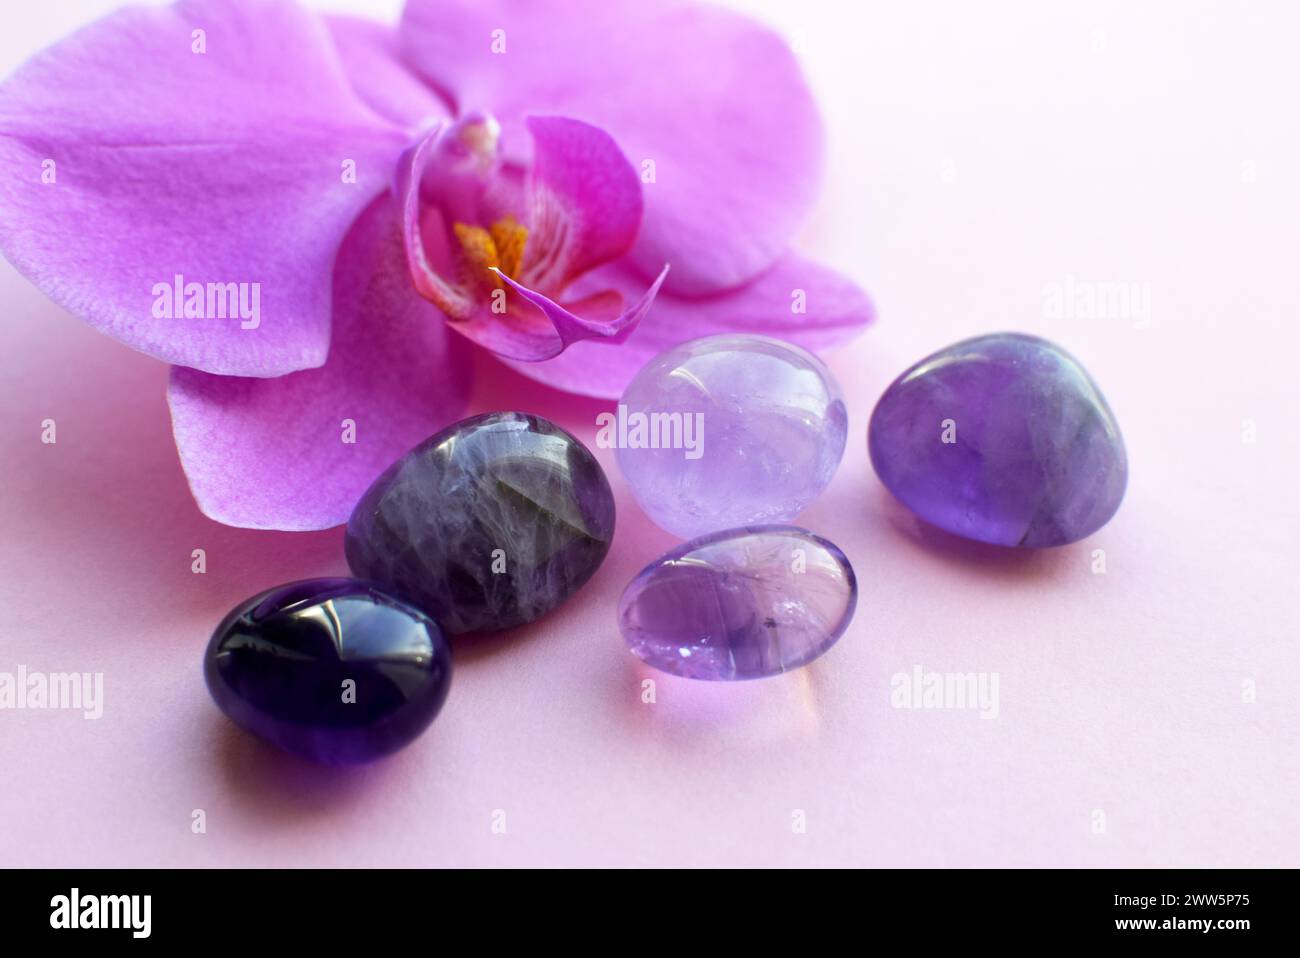 Amethyst crystals and orchid flower. Healing crystals, the magic of precious stones. Stock Photo